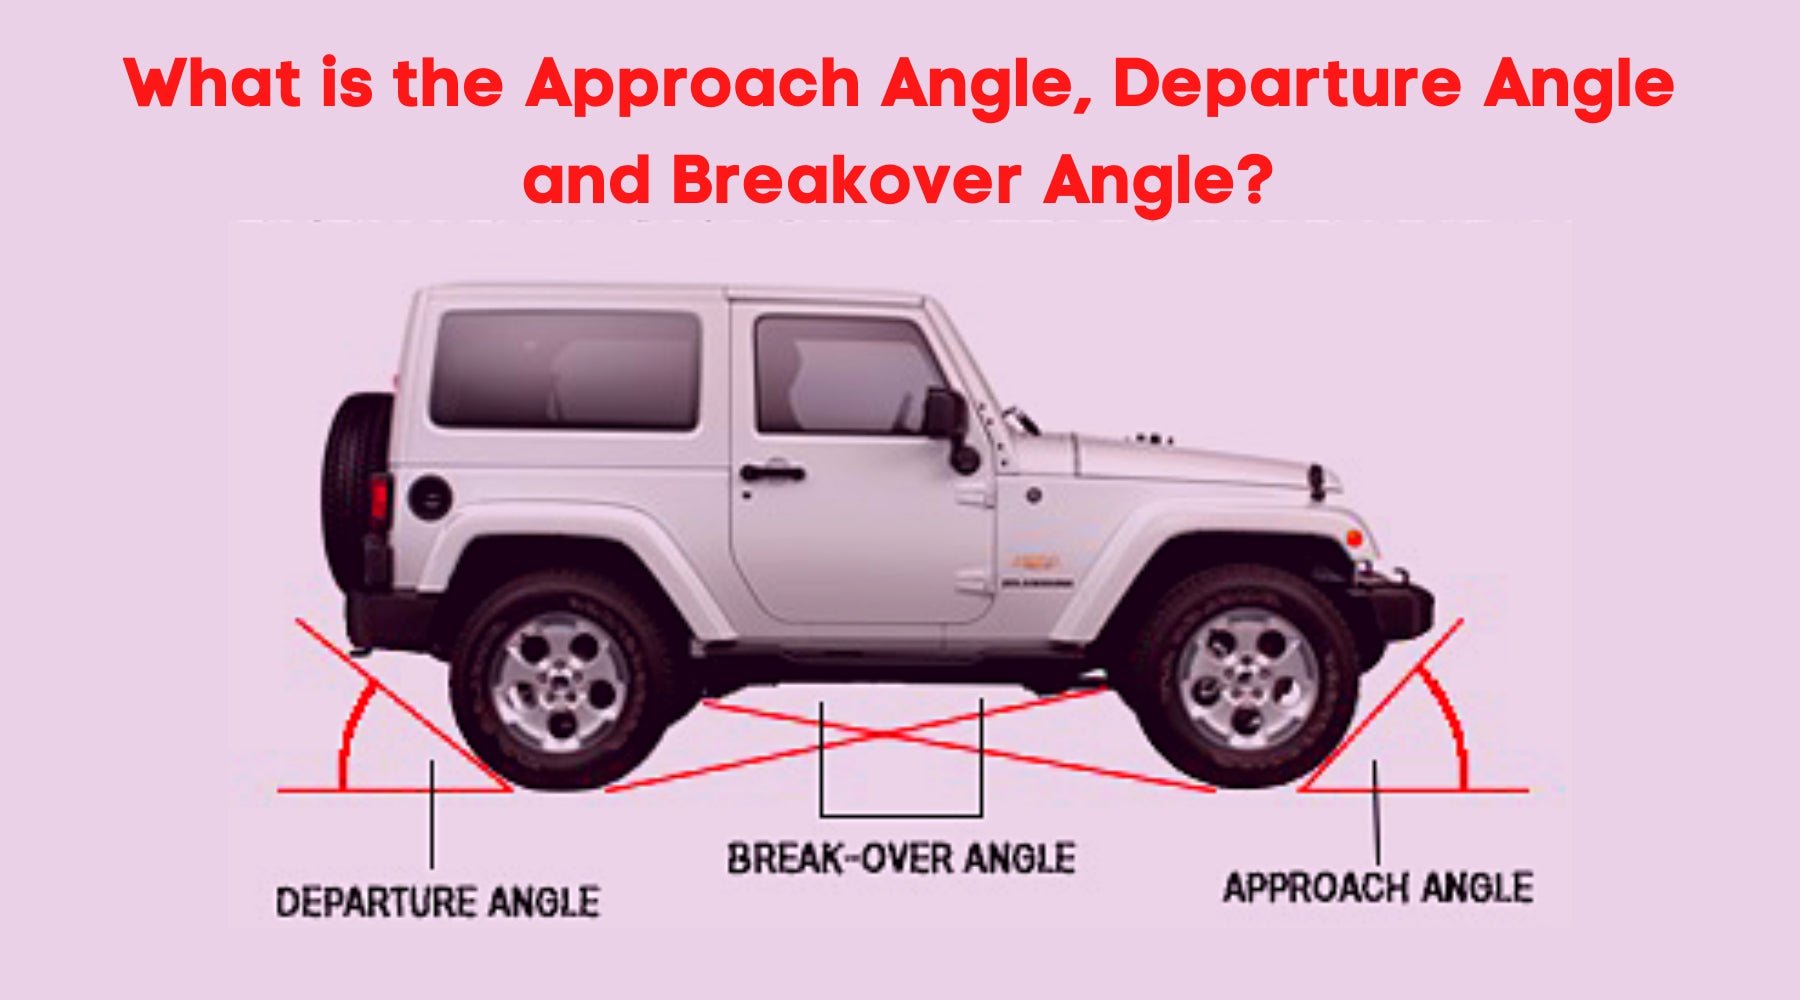 What is the Approach Angle, Departure Angle and Breakover Angle